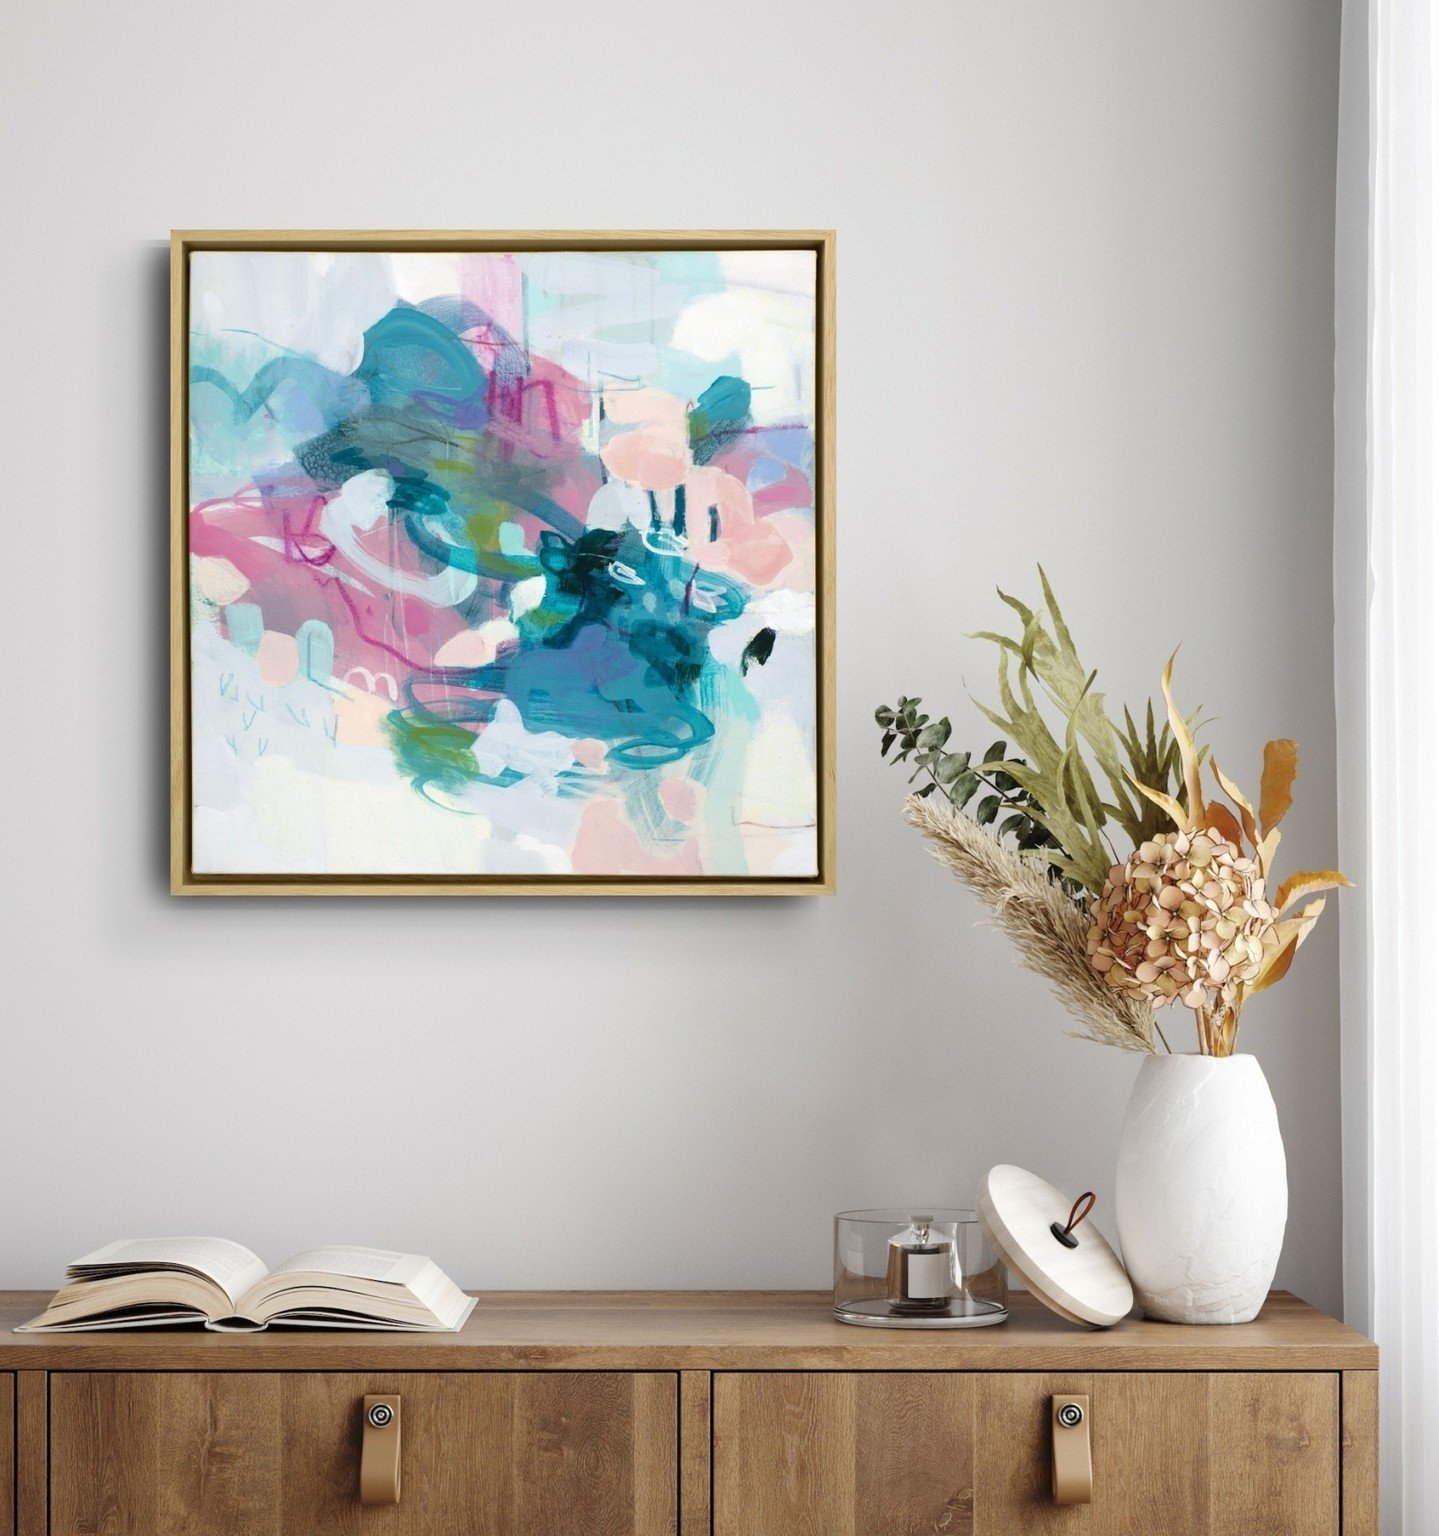 I really wanted to keep this little beauty!
But instead, it's available through the Blue Crow Gallery in Toronto. Comes with a gorgeous solid wood contemporary float frame. I love how it's so minimalist, simple, pastel soft and very pretty.  Definite